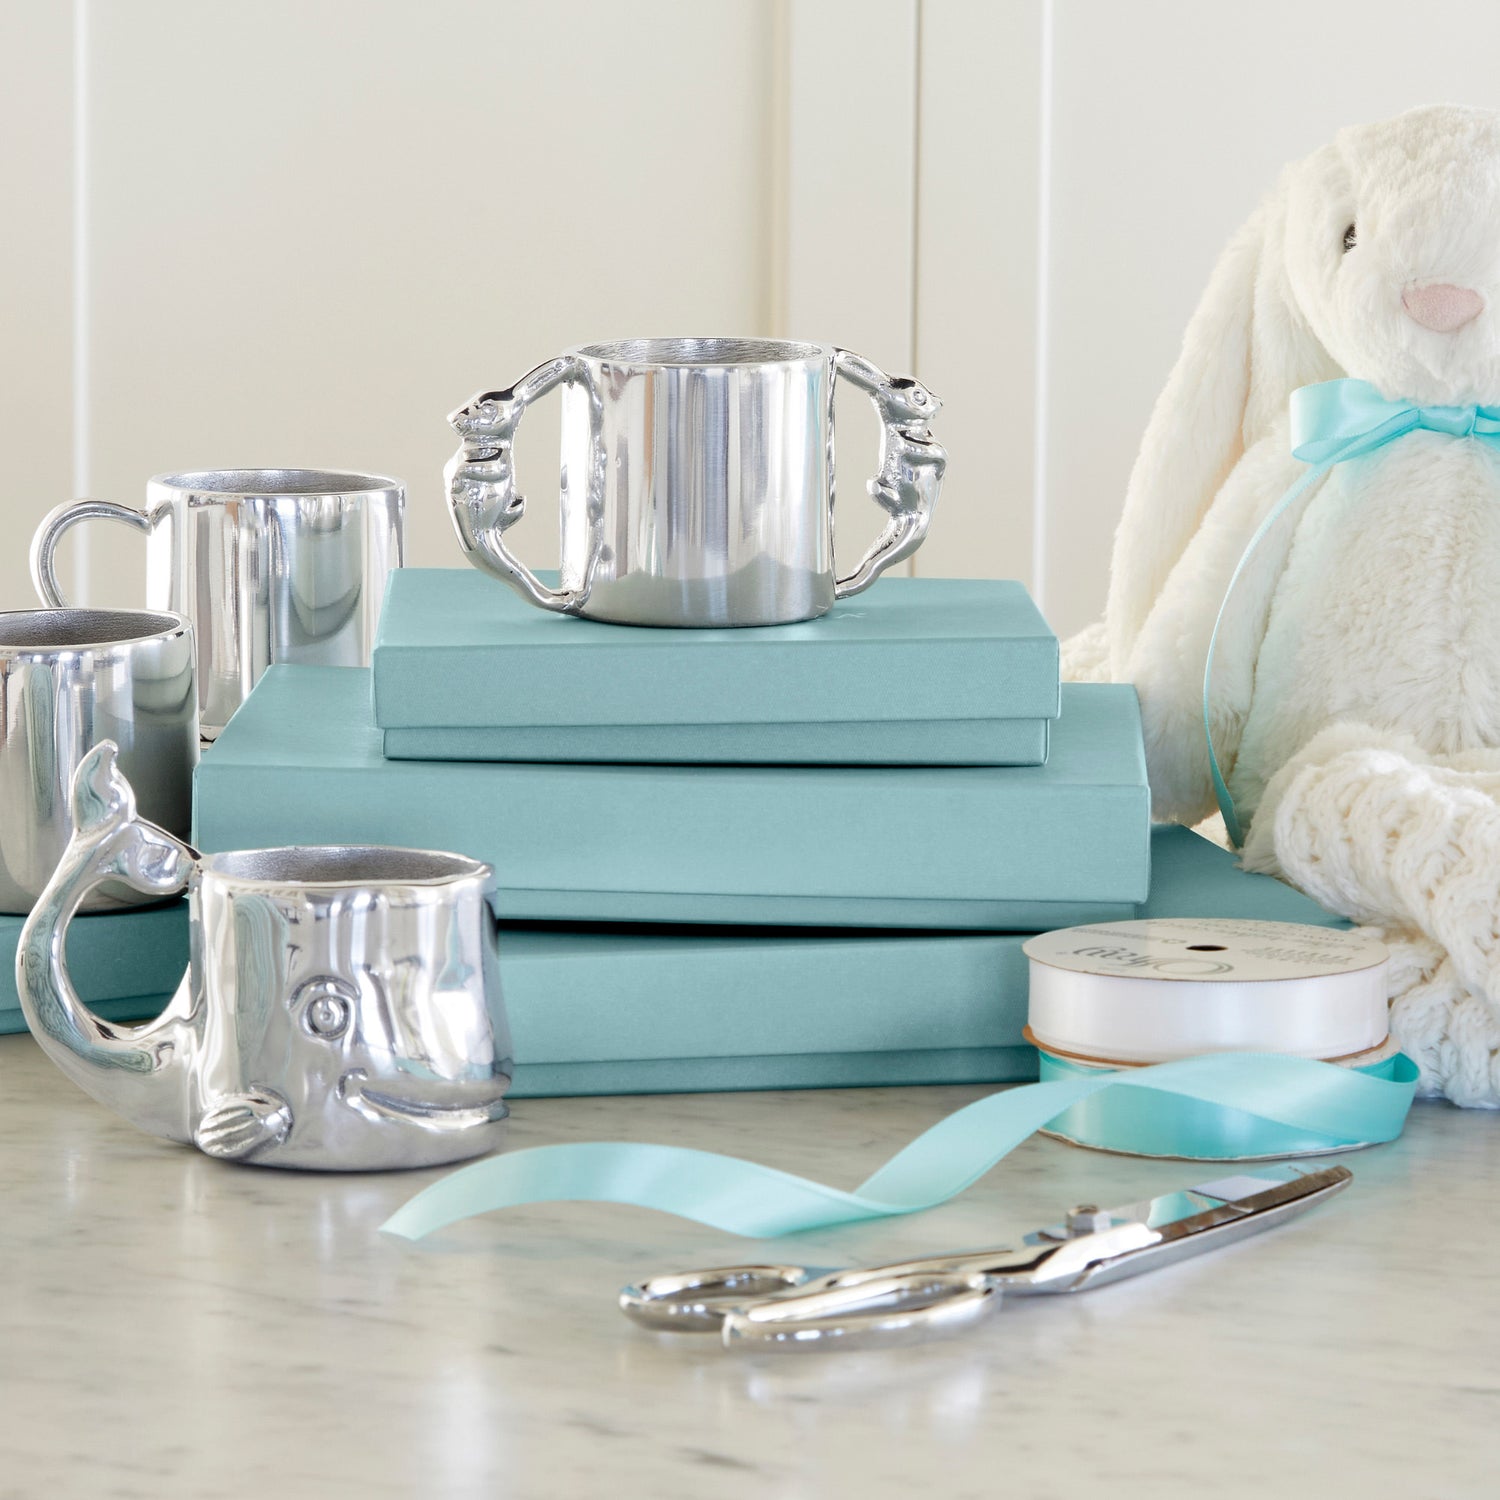 silver baby gifts - silver baby cups, ribbon, scissors and white bunny